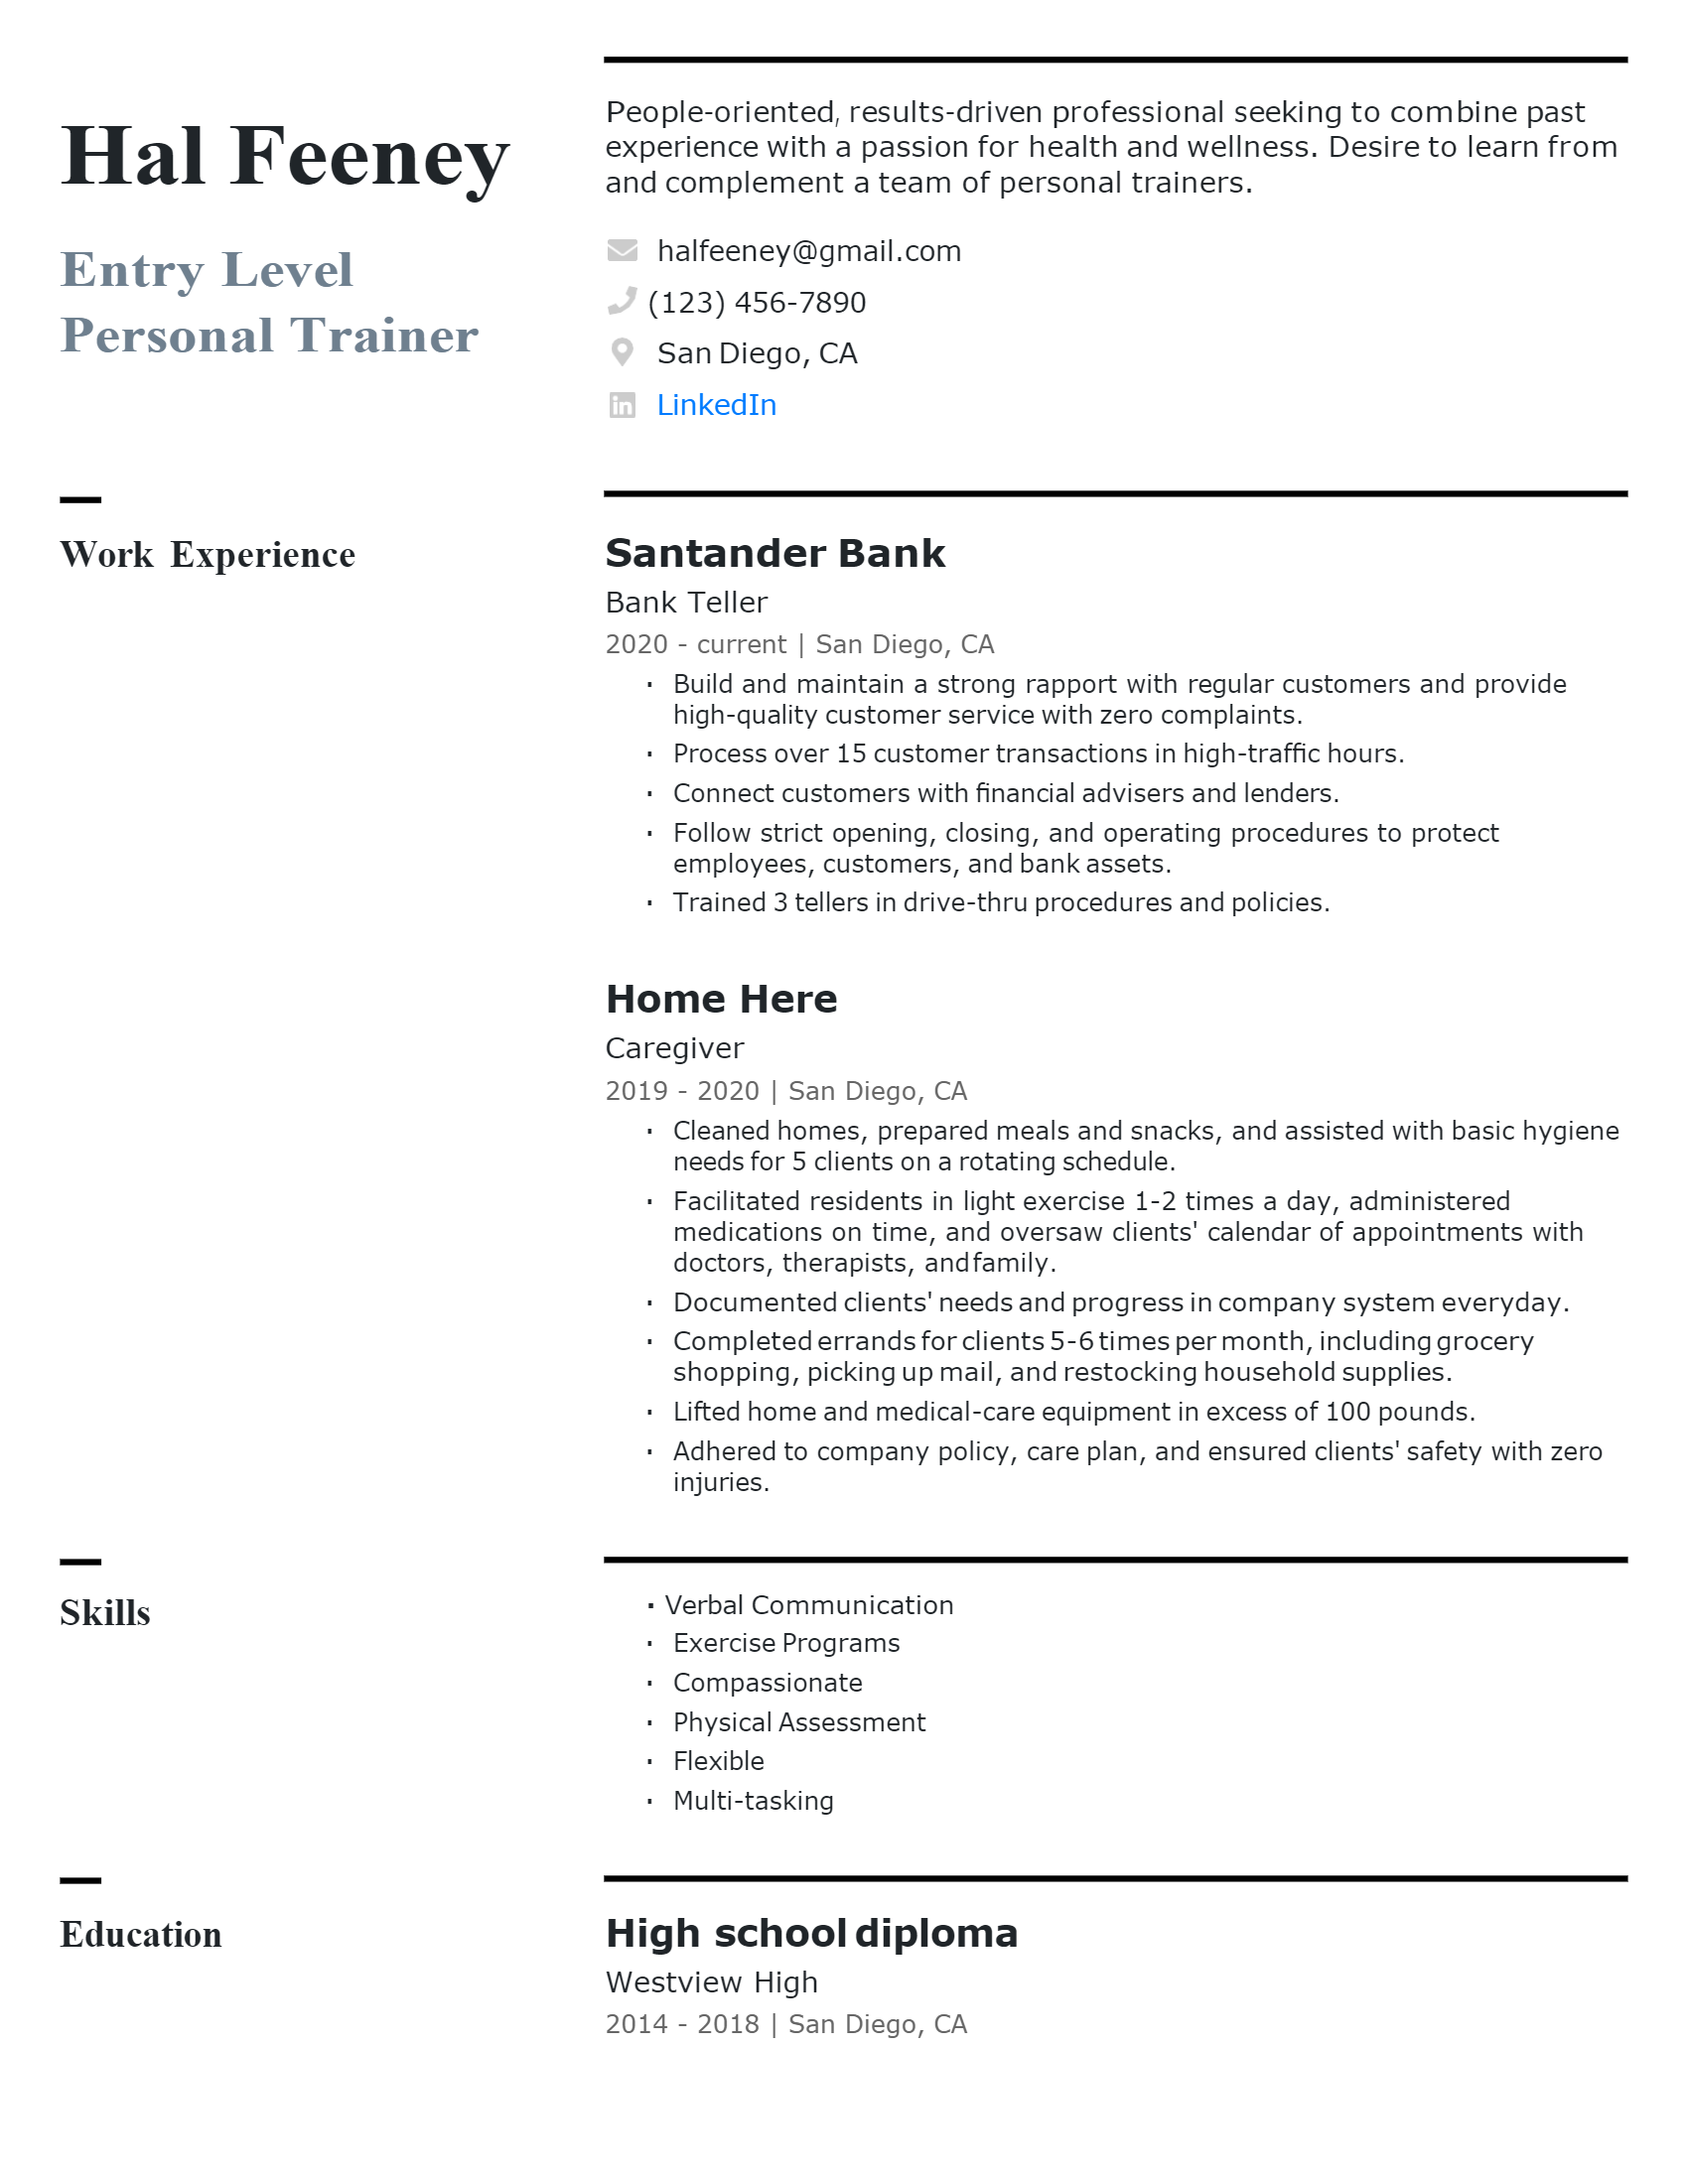 download-free-entry-level-personal-trainer-resume-docx-word-template